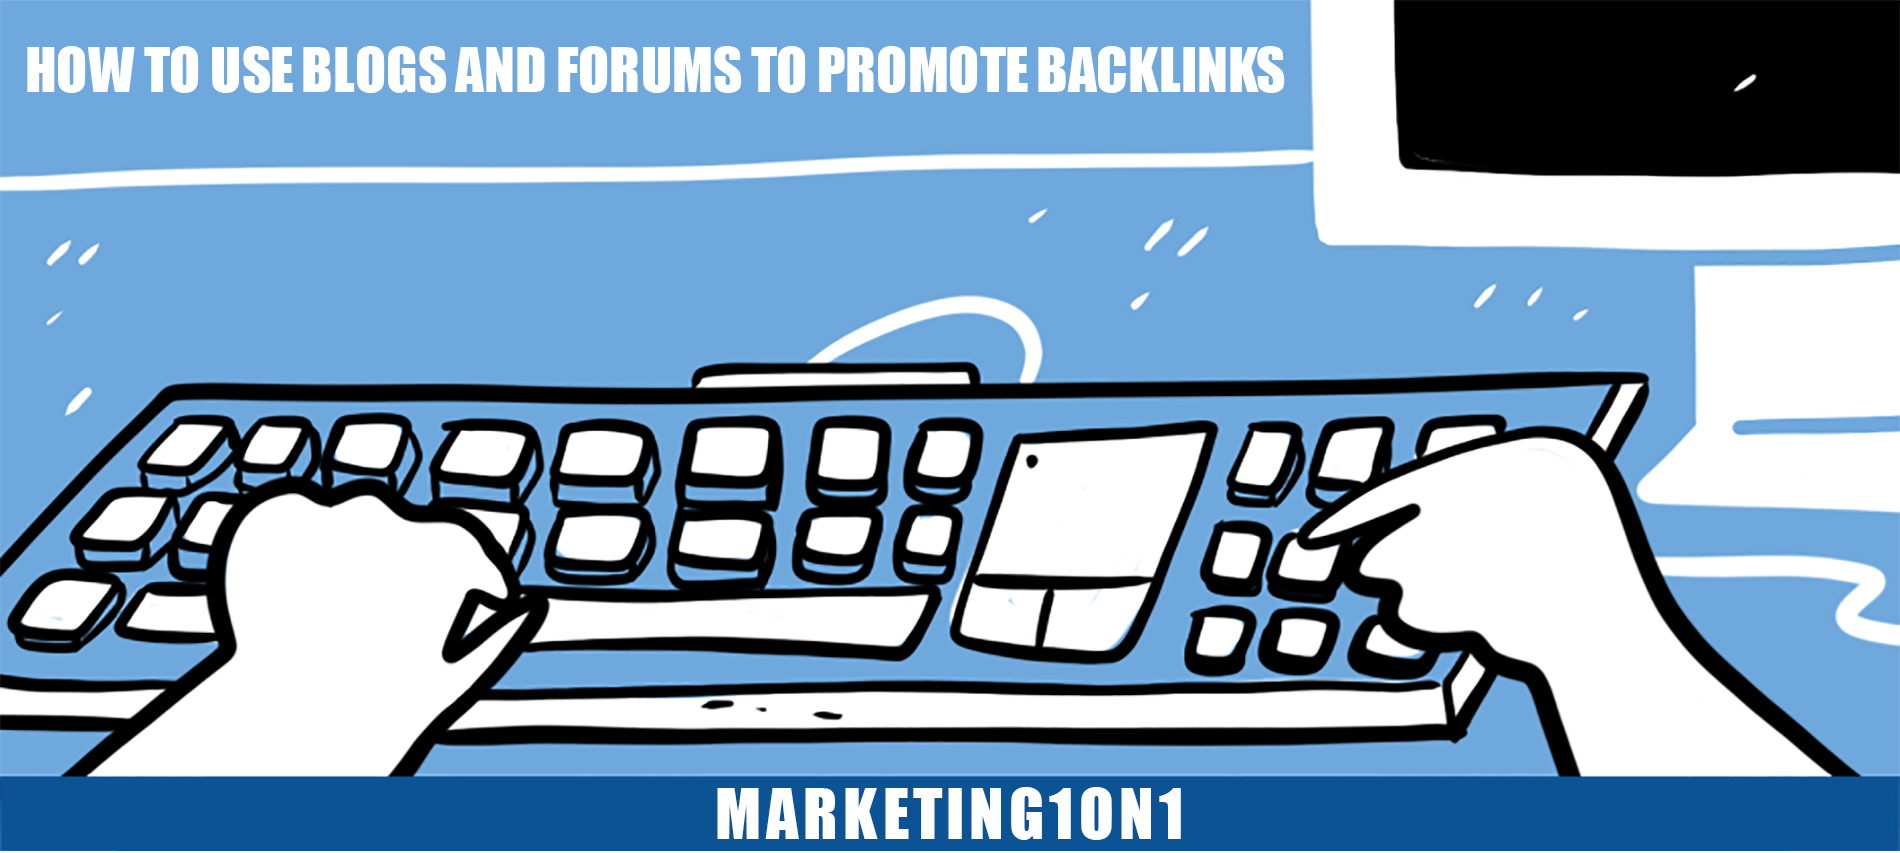 How to use blogs and forums to promote backlinks?